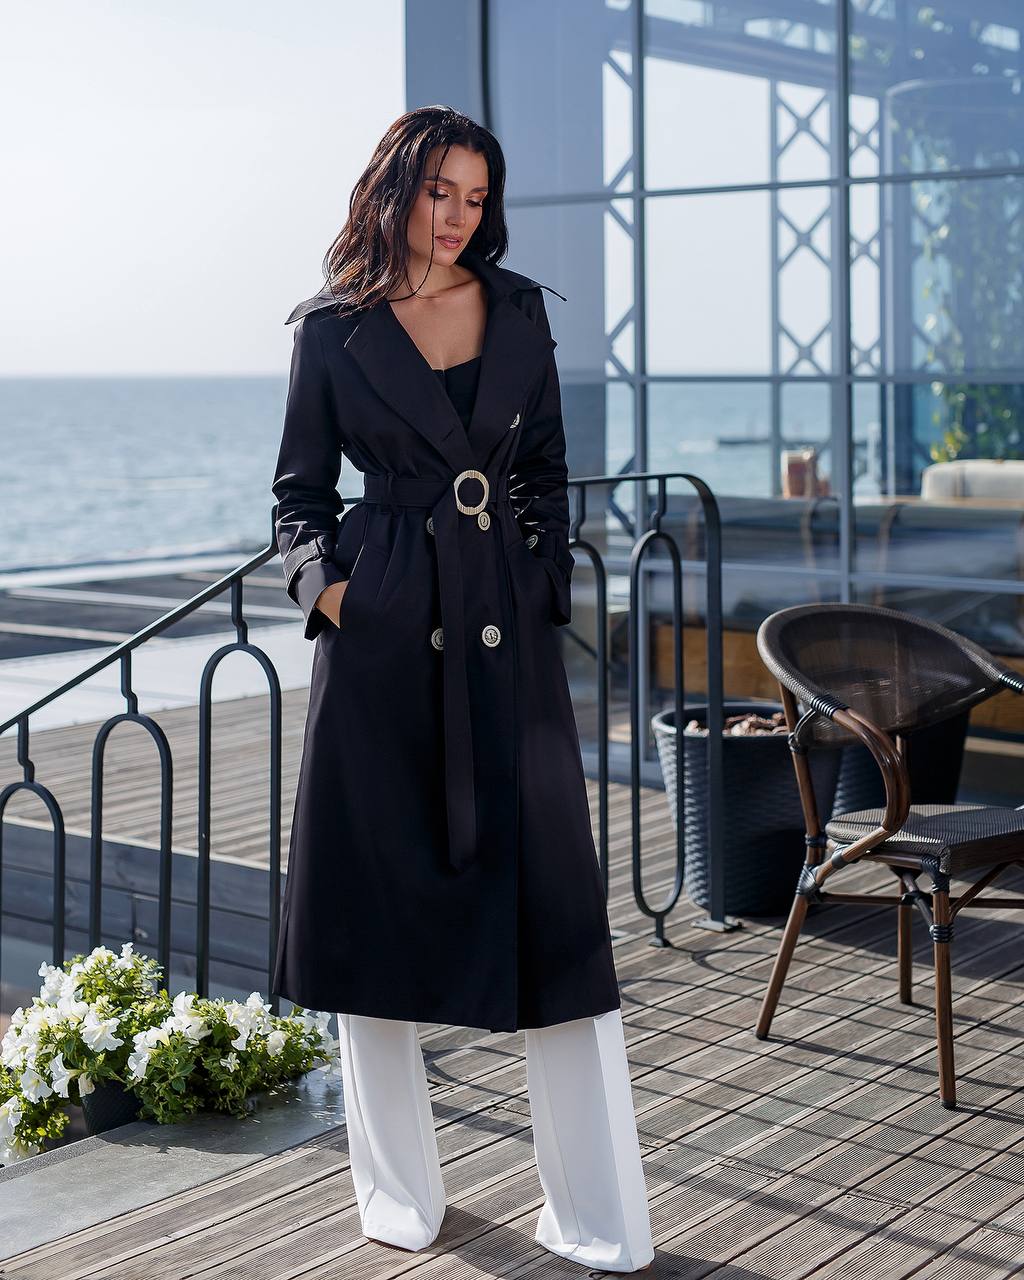 trinarosh Black Double-Breasted Belted Trench Coat